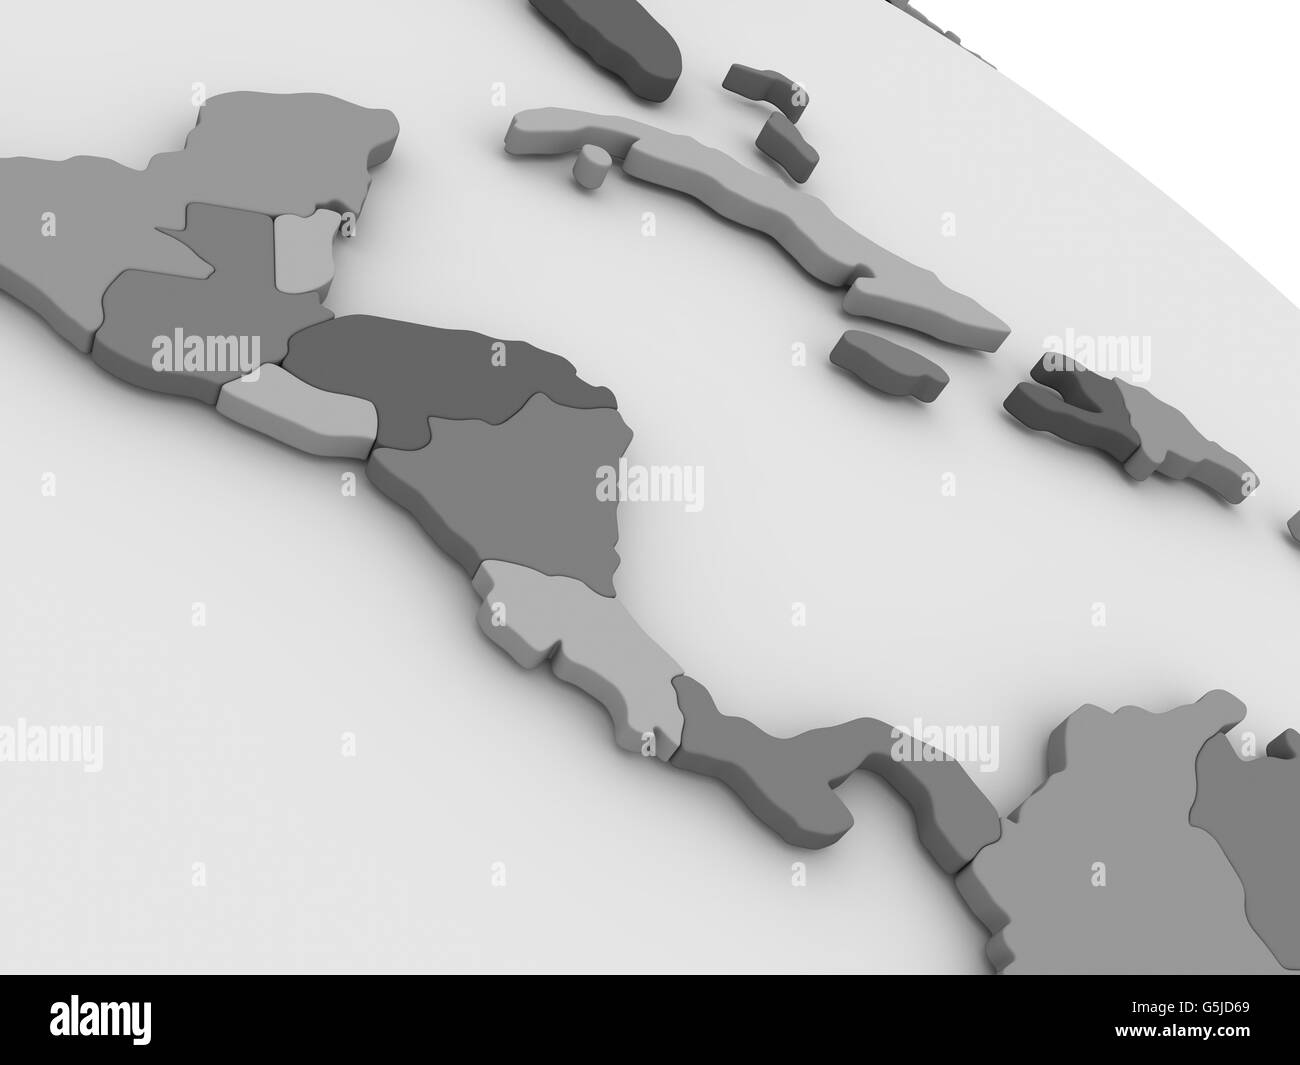 Map of Central America on grey model of Earth. 3D illustration Stock Photo